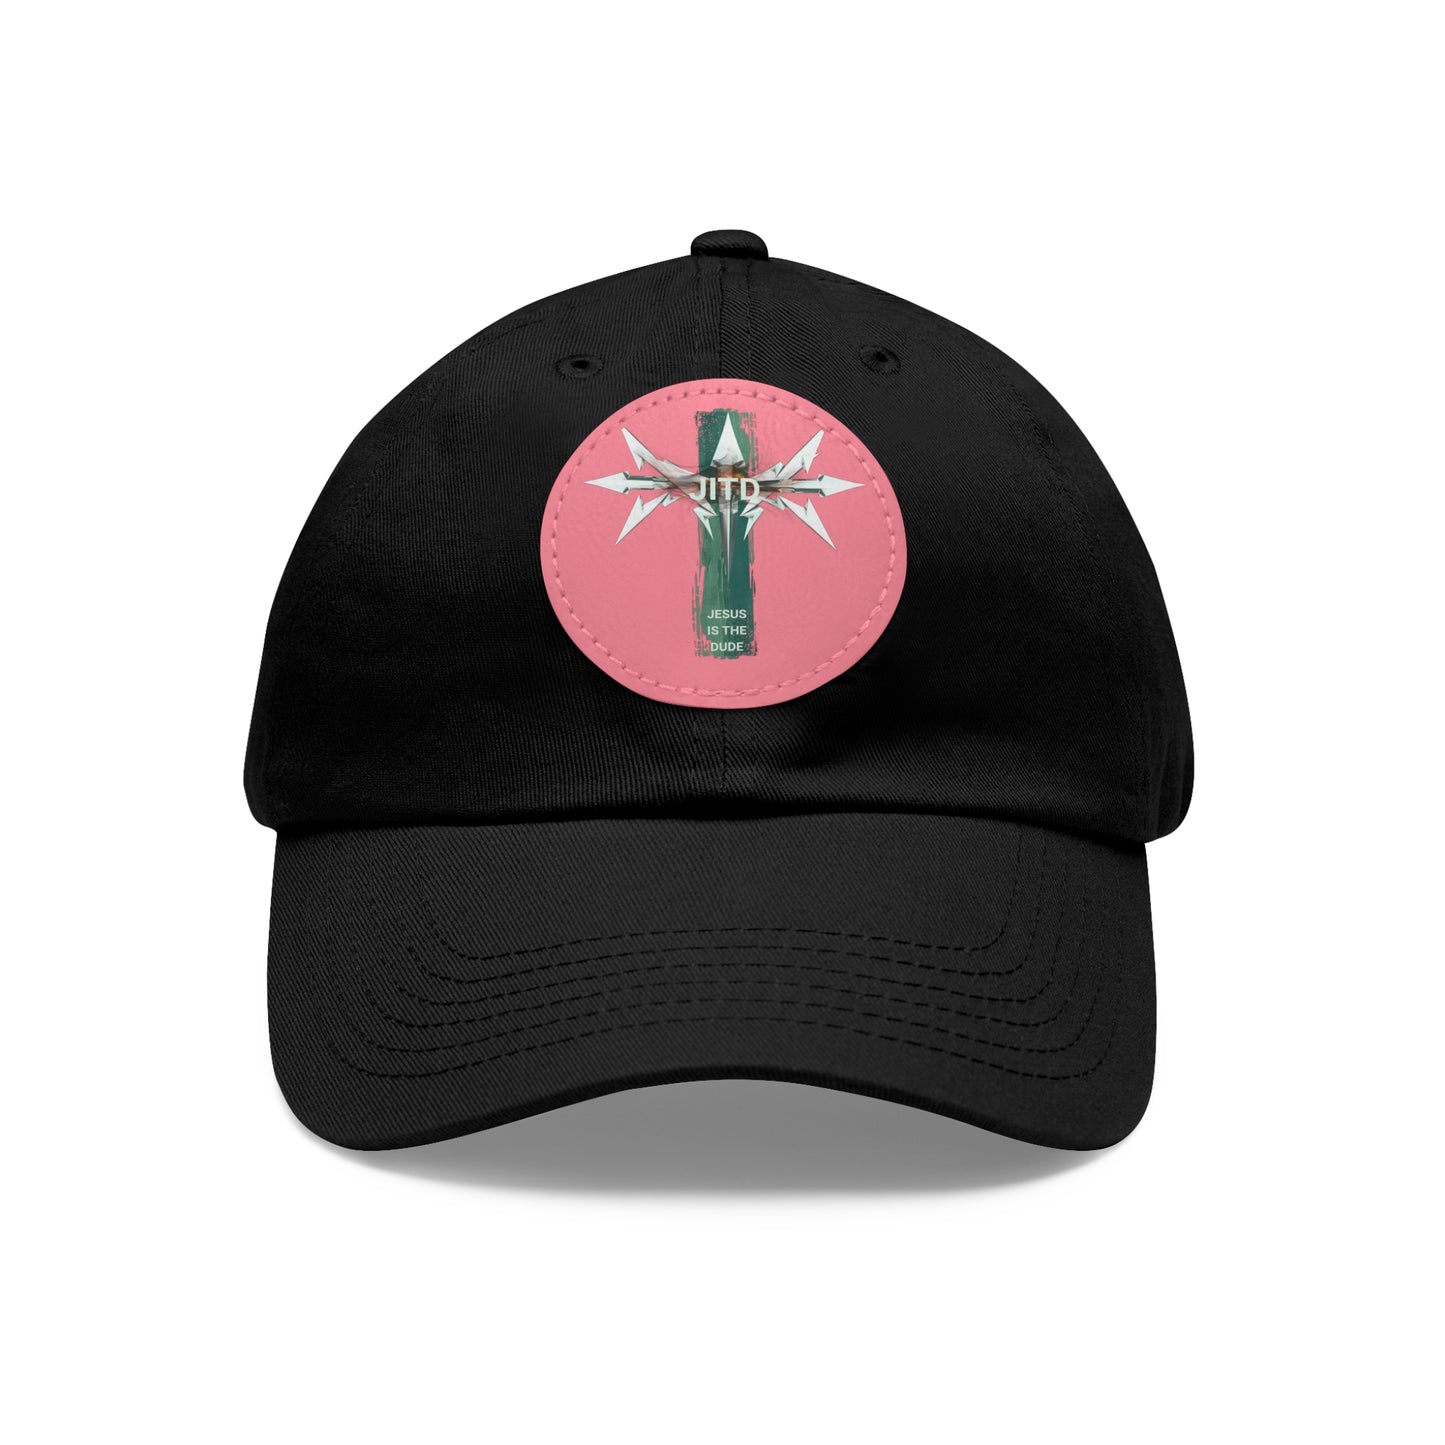 JITD SHADOW CROSS HAT WITH LEATHER PATCH